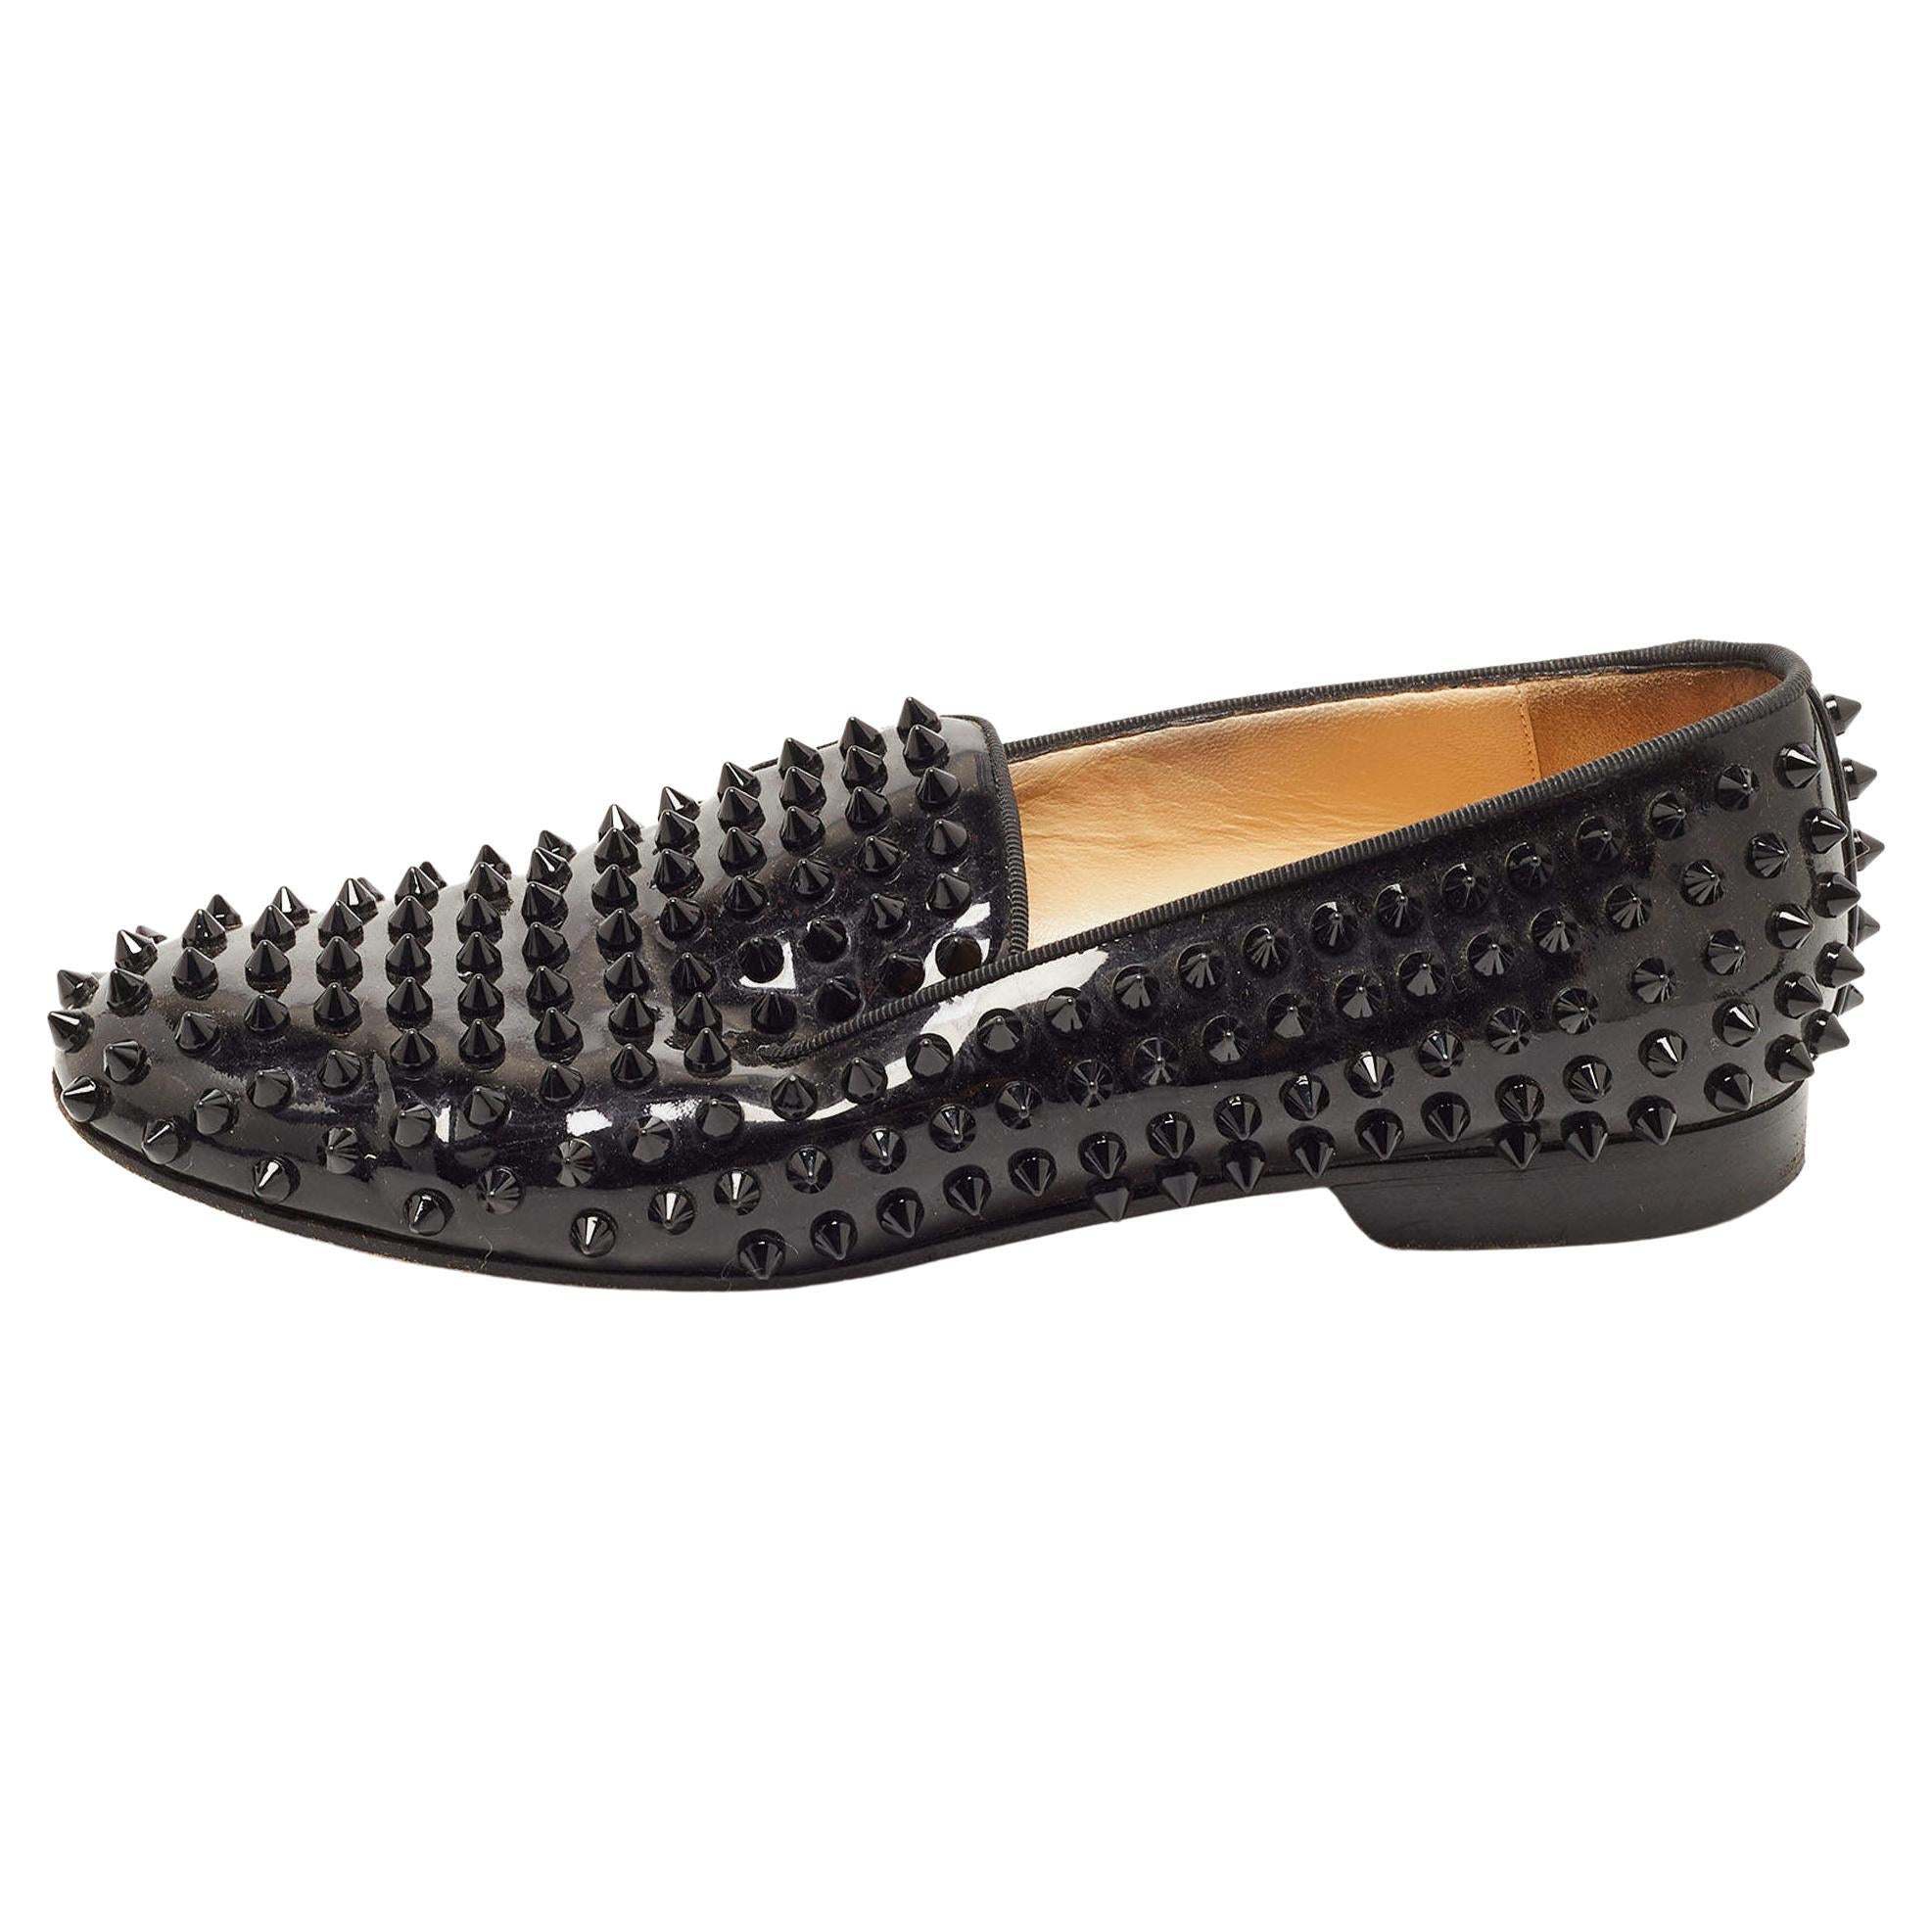 Christian Louboutin Black Dandelion Spikes Smoking Slippers Size 38 For Sale